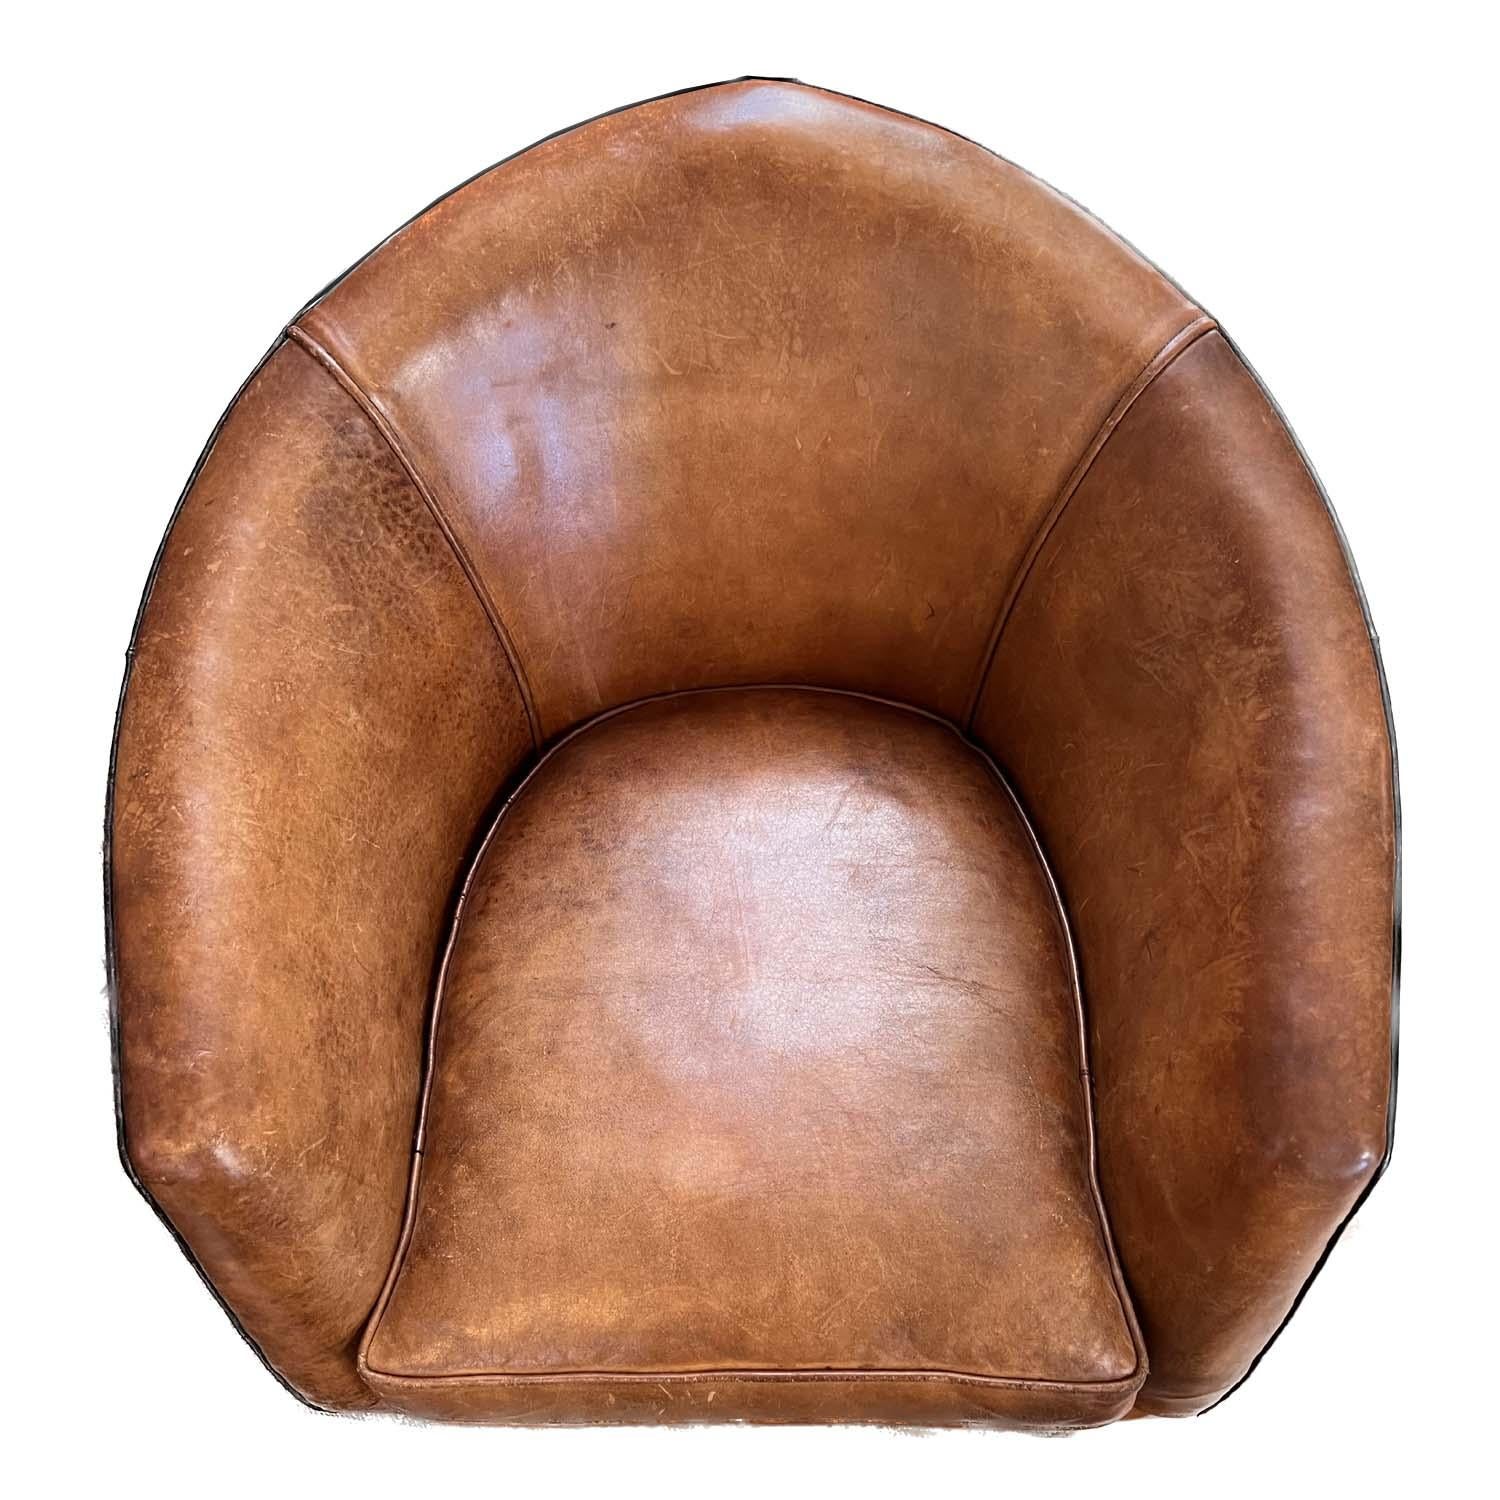 Sheepskin Pair of Bart Van Bekhoven, 'Cocoon' Lounge Chair, Leather, the Netherlands